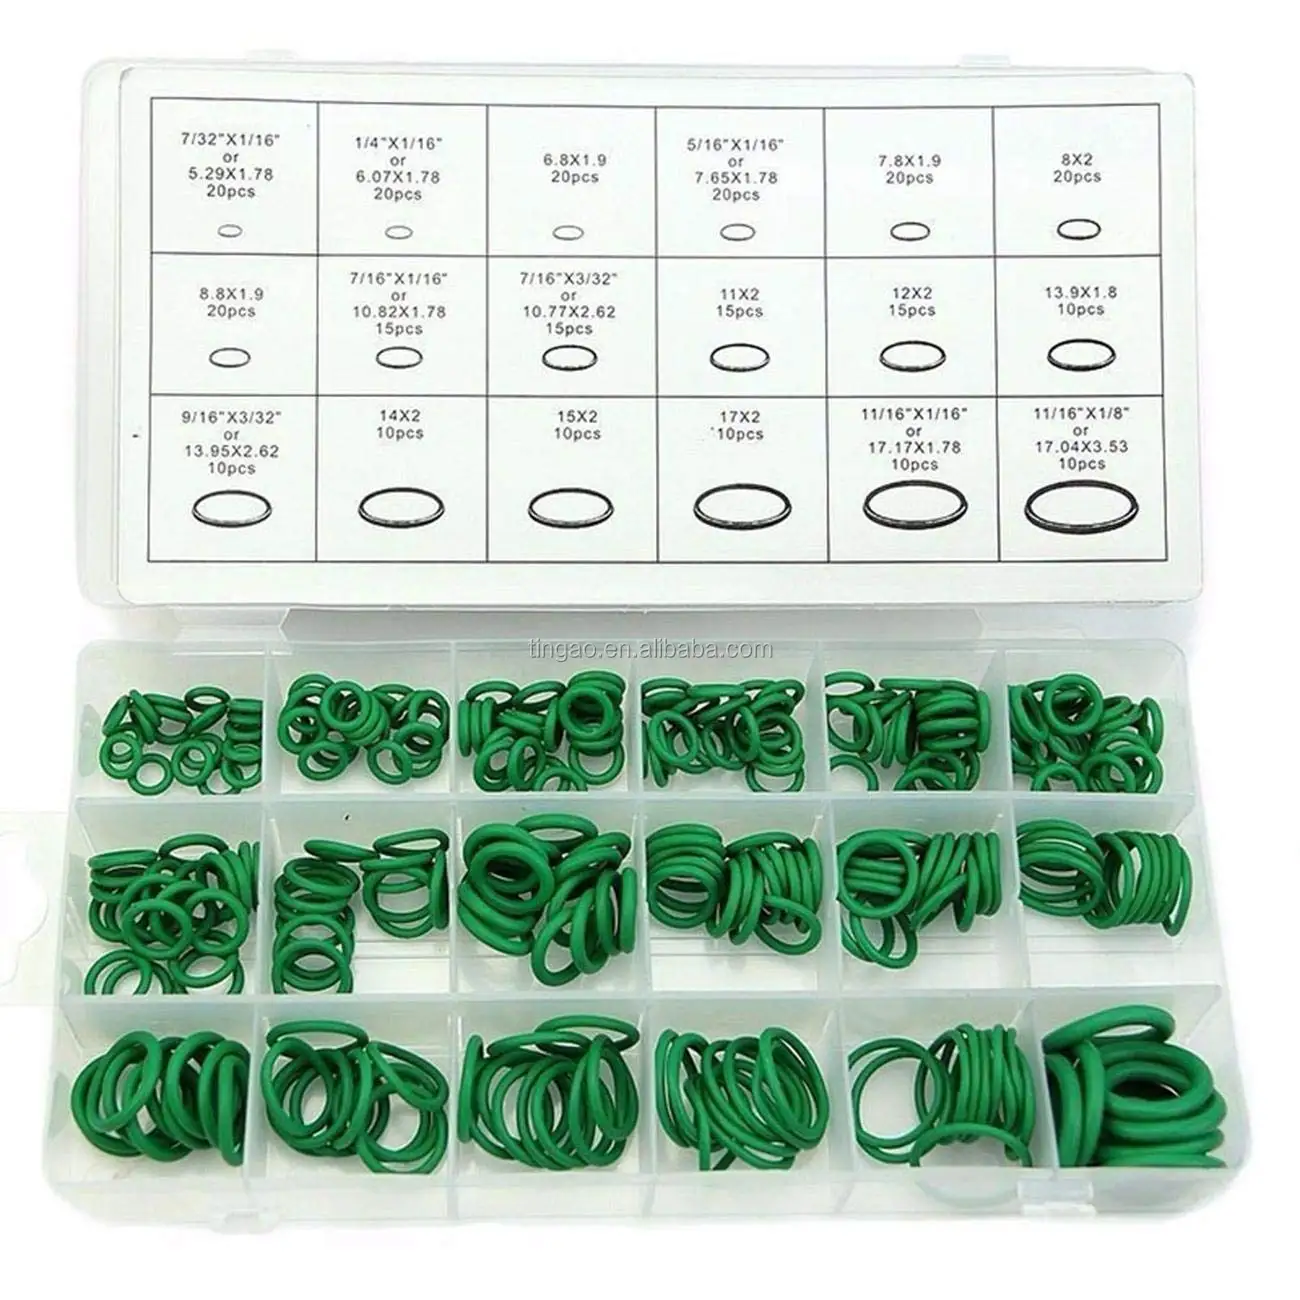 Glarks 18 Sizes 270Pcs Rubber O-Ring Car Auto Vehicle Repair Air Conditioning Compressor Seals Assortment Kit Green 